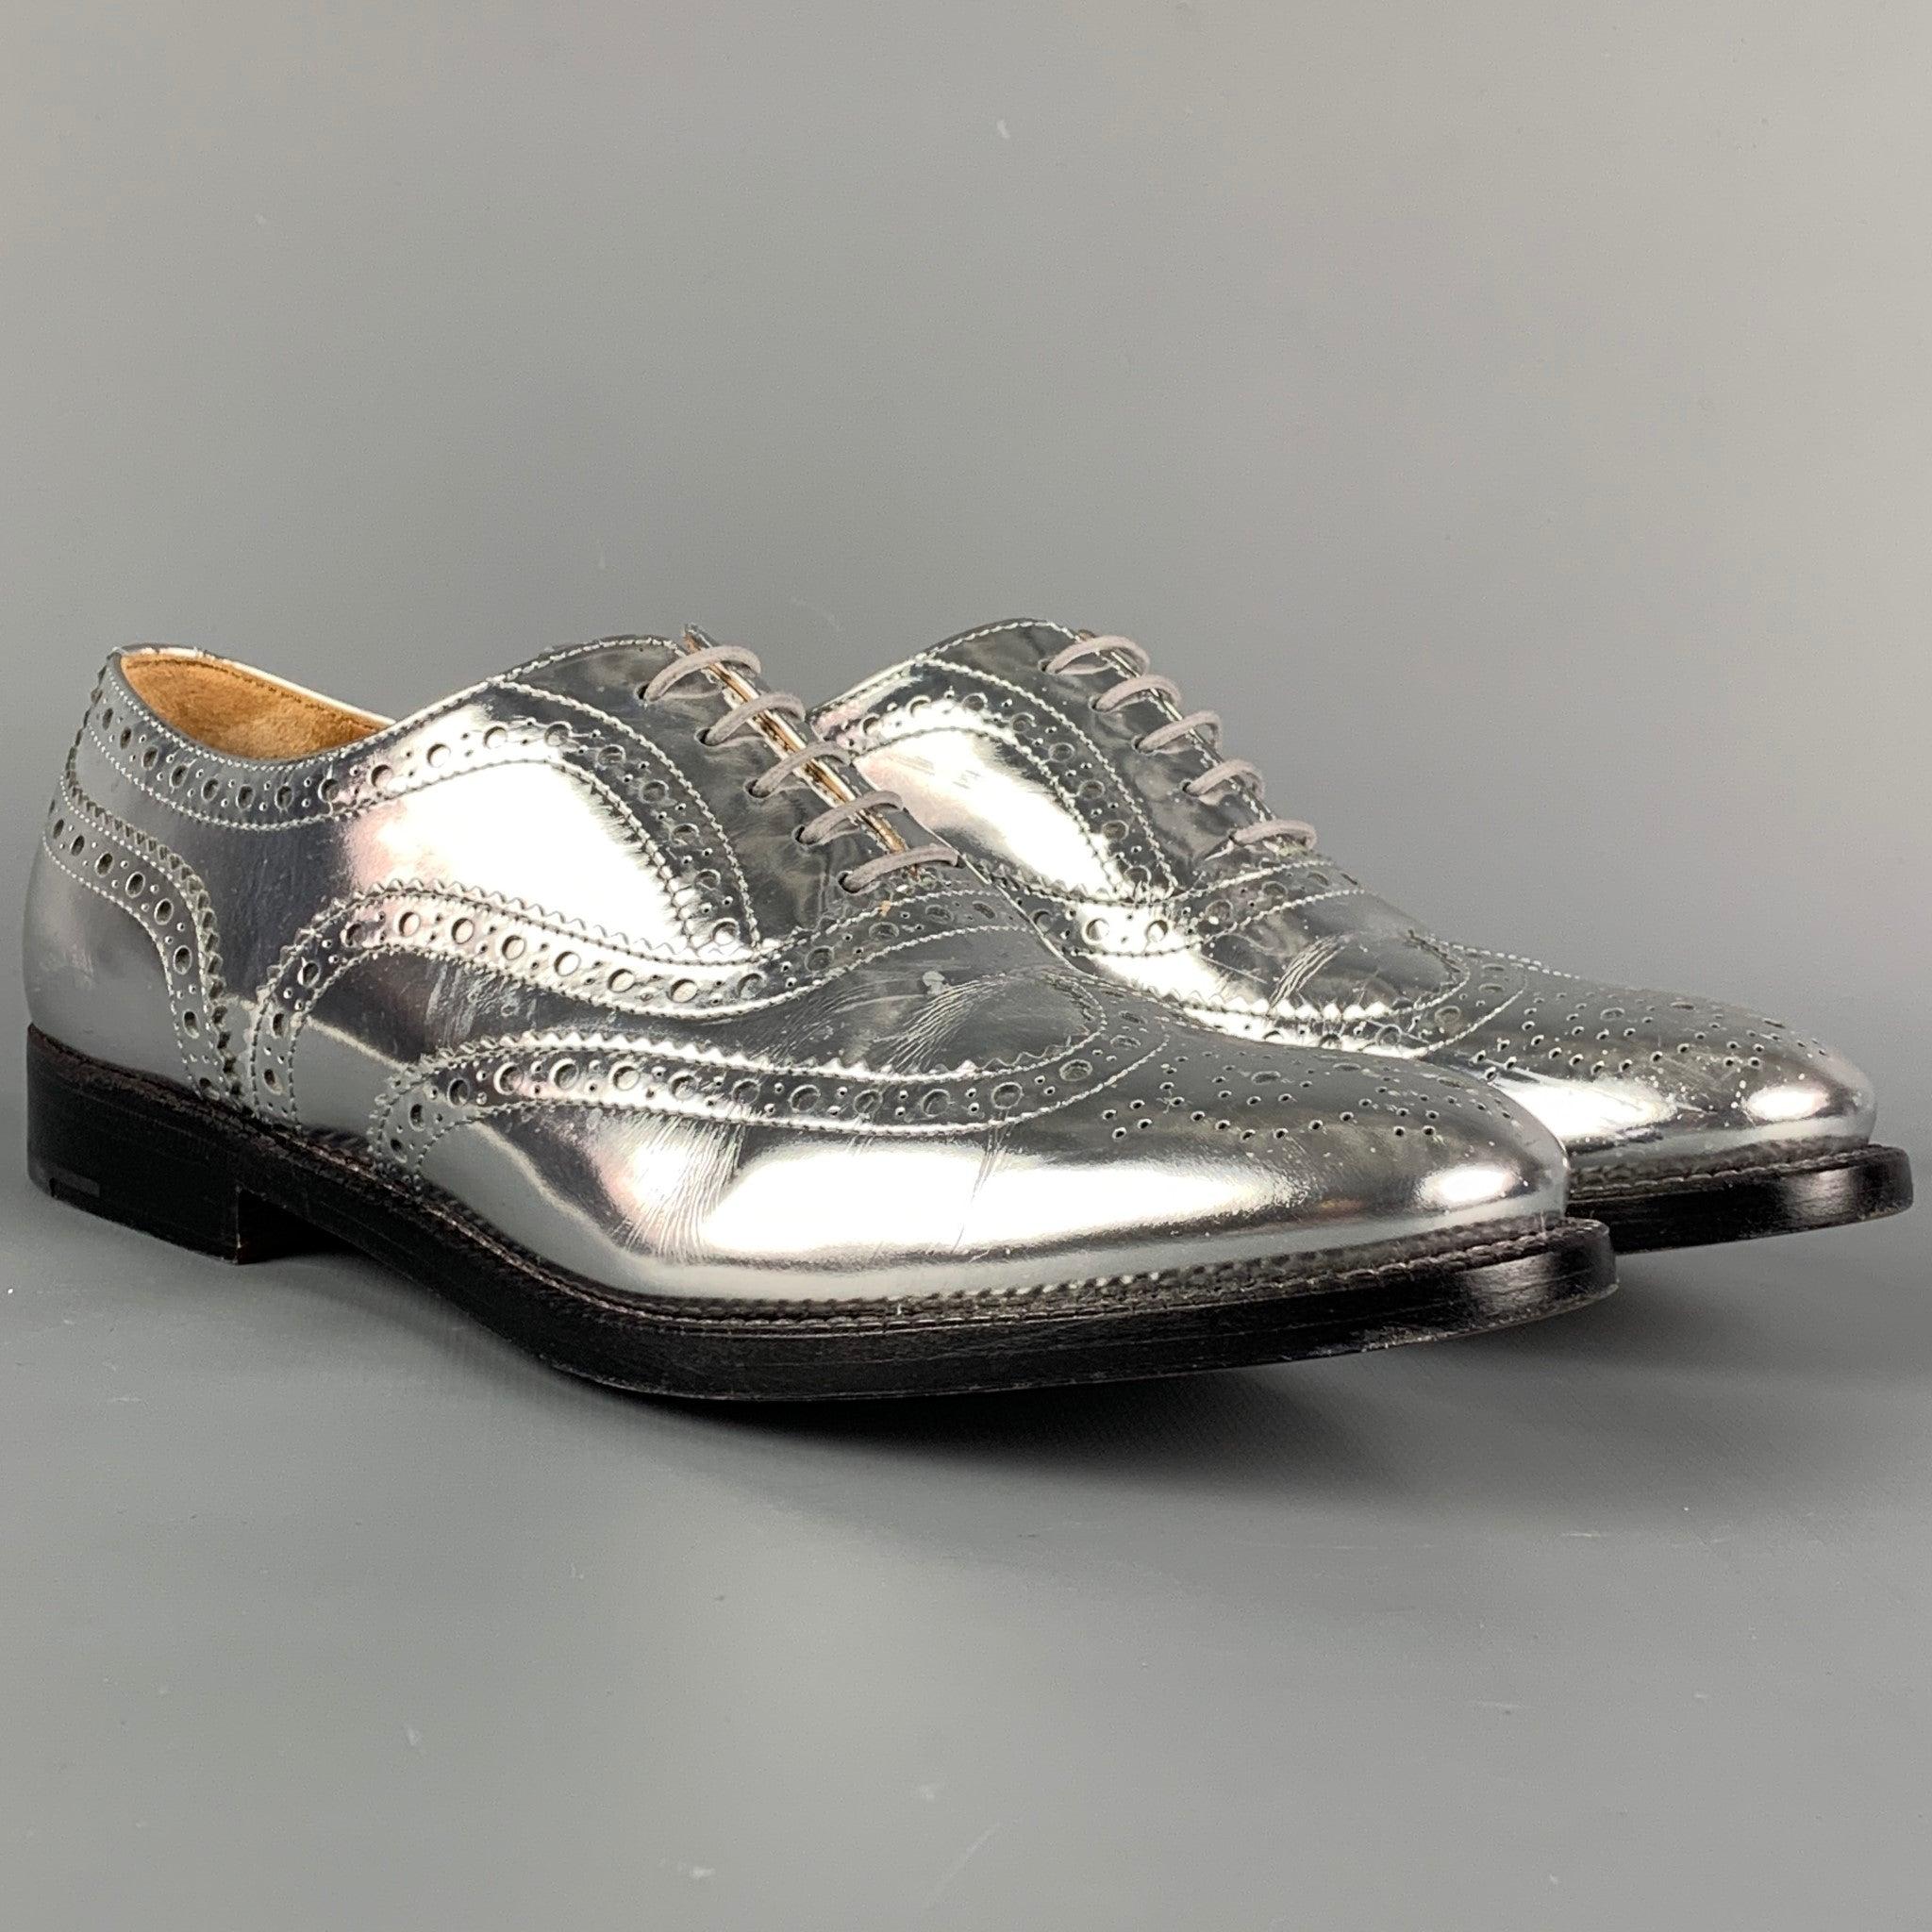 CHURCH'S shoes comes in a silver metallic perforated leather featuring a wingtip style and a lace up closure. Made in Italy.
Very Good
Pre-Owned Condition. 

Marked:   37.5Outsole: 11 inches  x 3.5 inches 
  
  
 
Reference: 115110
Category: